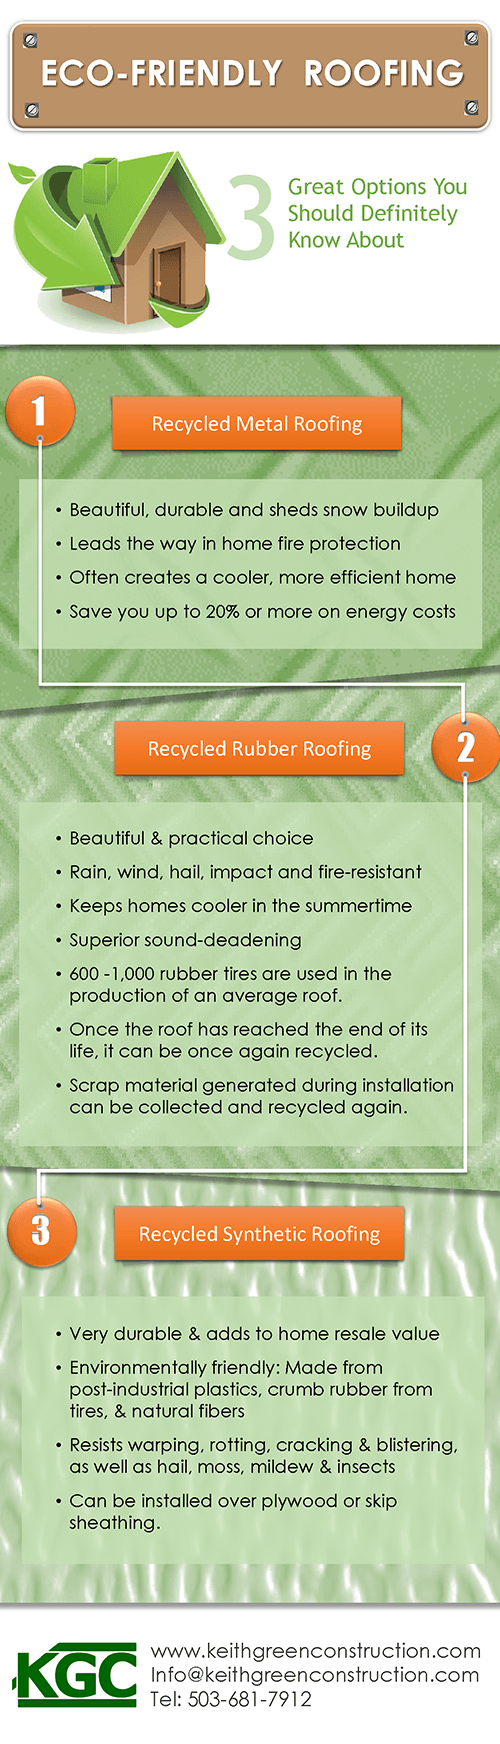 Eco-Friendly-Roofing-Final